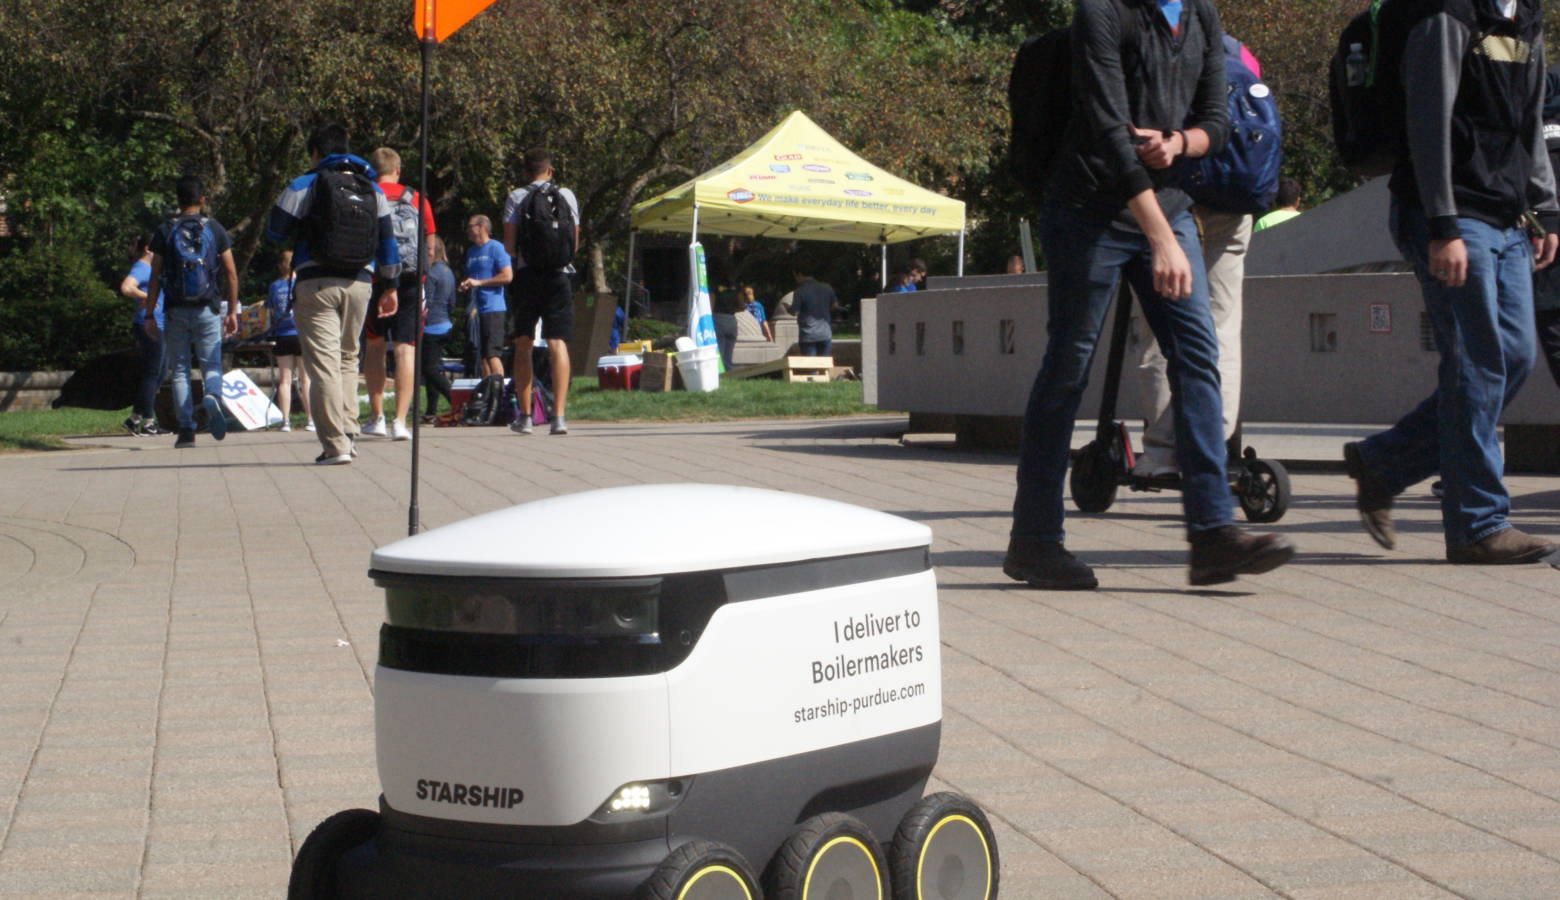 Starship Technologies shows one of the company's delivery robots on Purdue University's campus.  (Samantha Horton/IPB News)